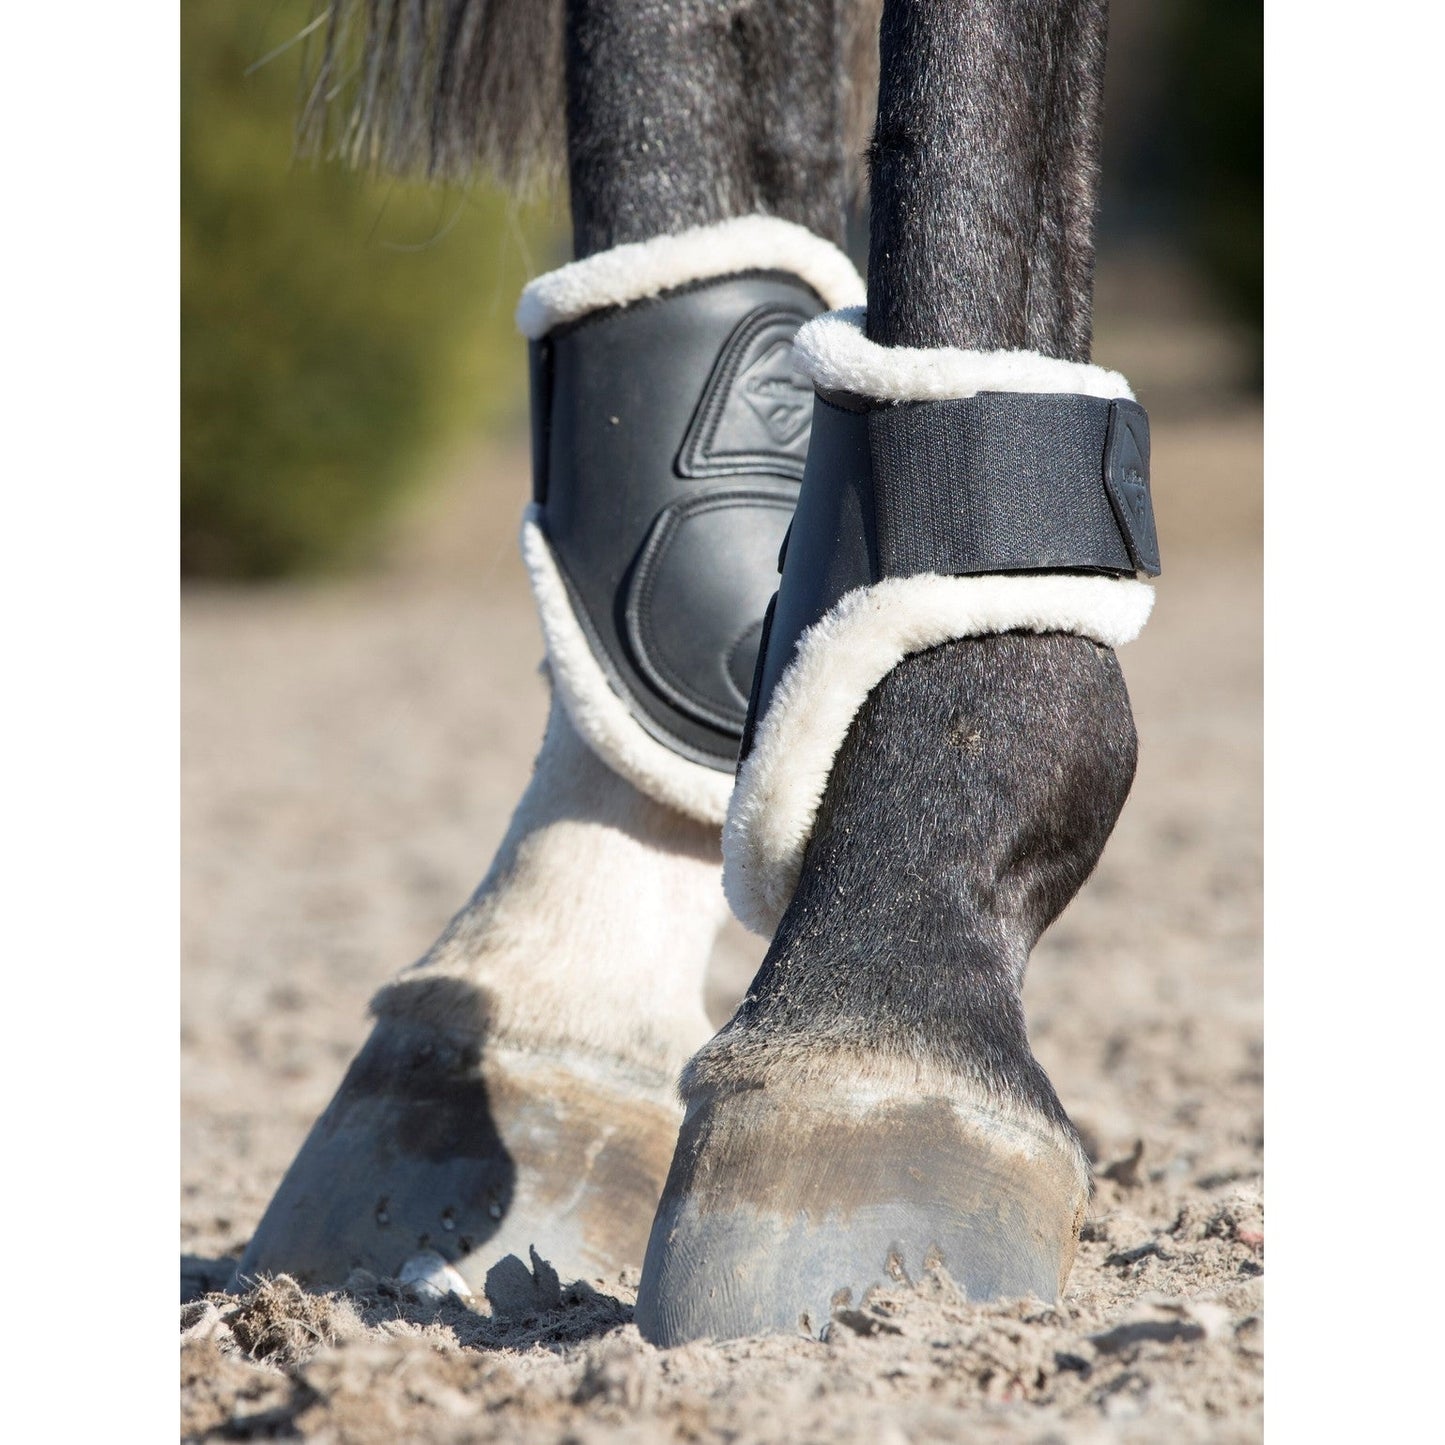 LeMieux Capella Comfort Jumping Boots-Southern Sport Horses-The Equestrian